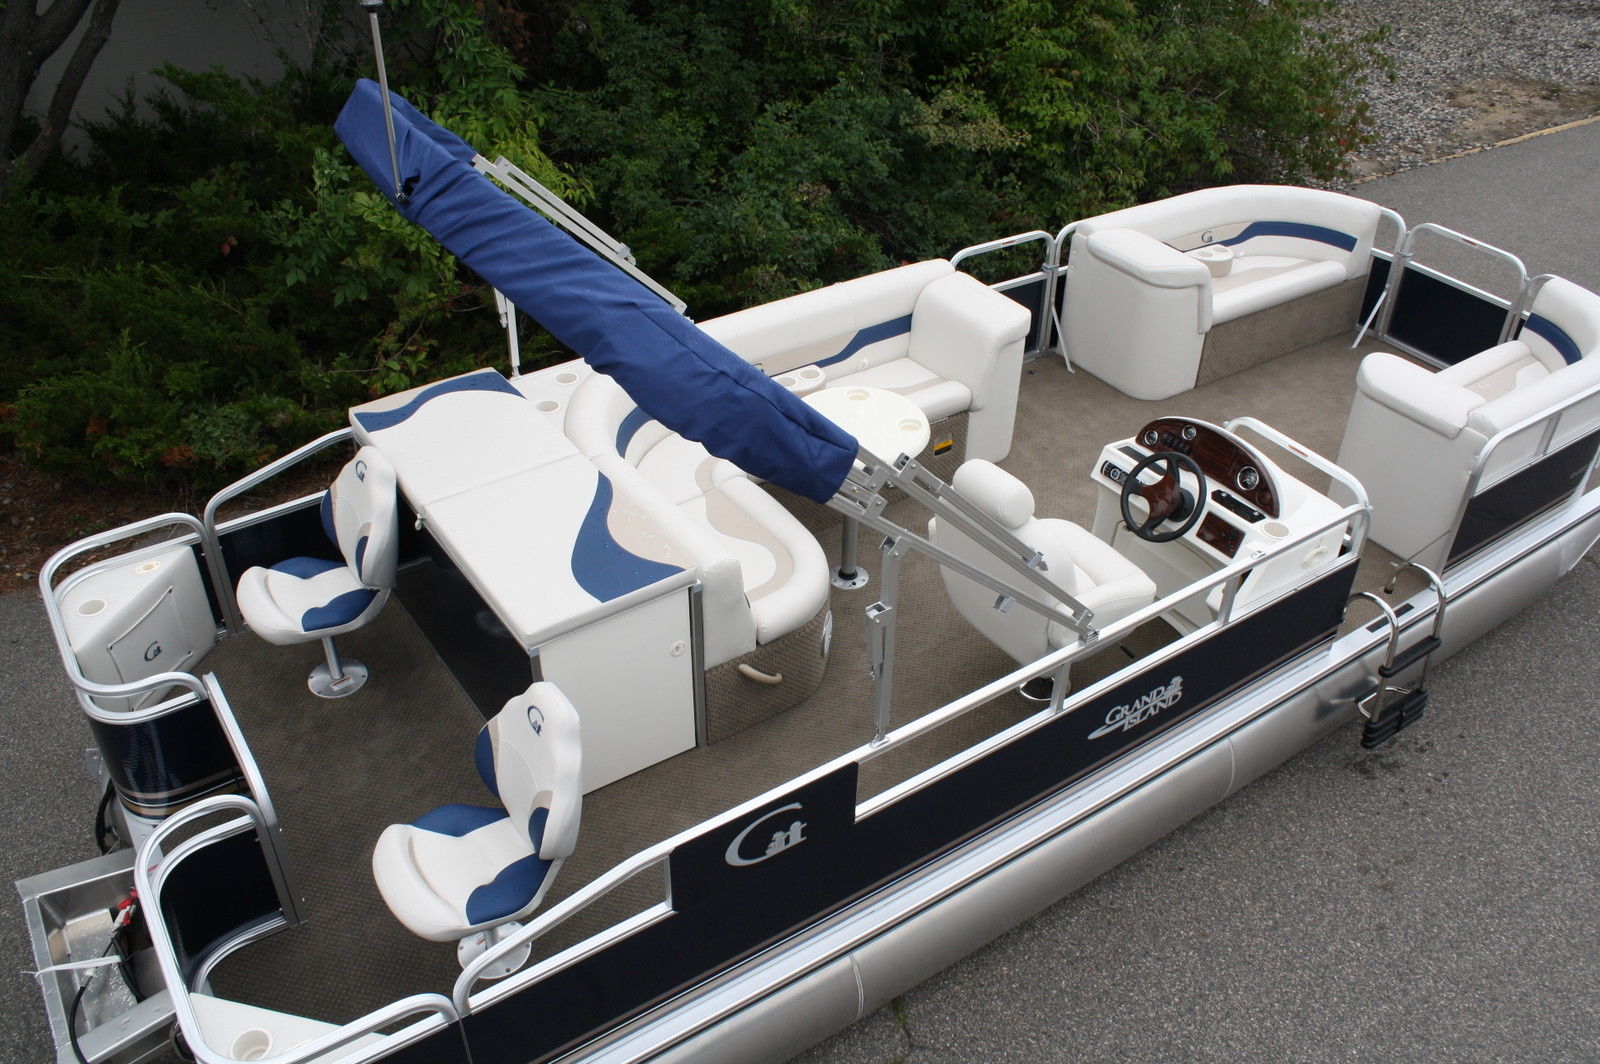 Rated for up to a 150 hp motor.This is a new 24 ft Grand Island Rear Fish p...